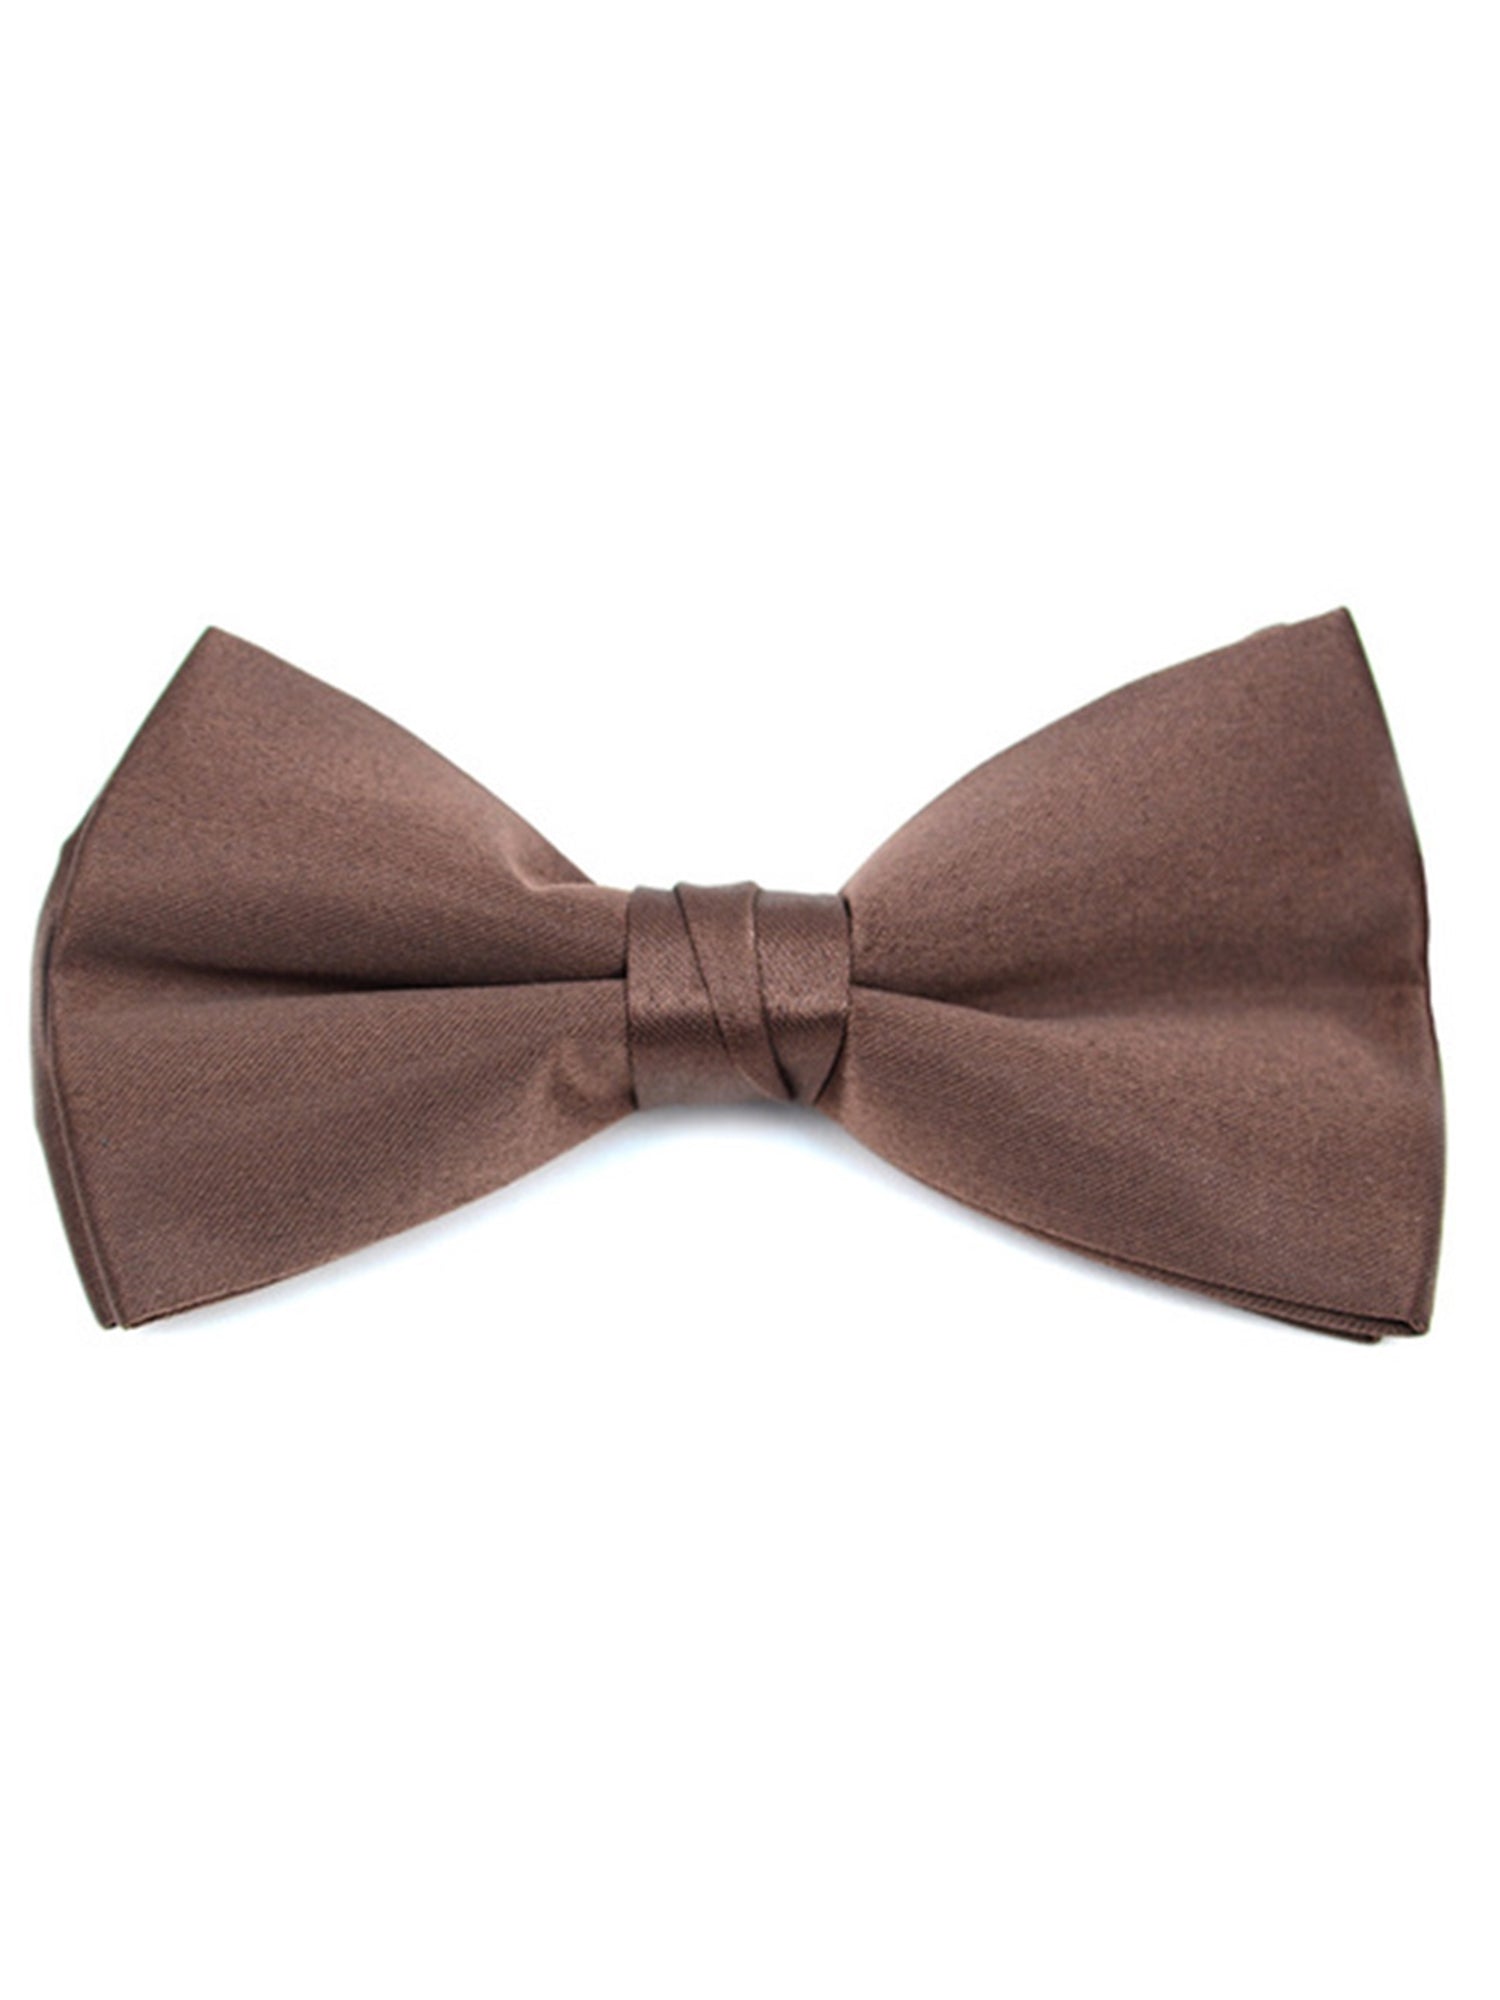 Men's Pre-tied Clip On Bow Tie - Formal Tuxedo Solid Color Men's Solid Color Bow Tie TheDapperTie Brown One Size 